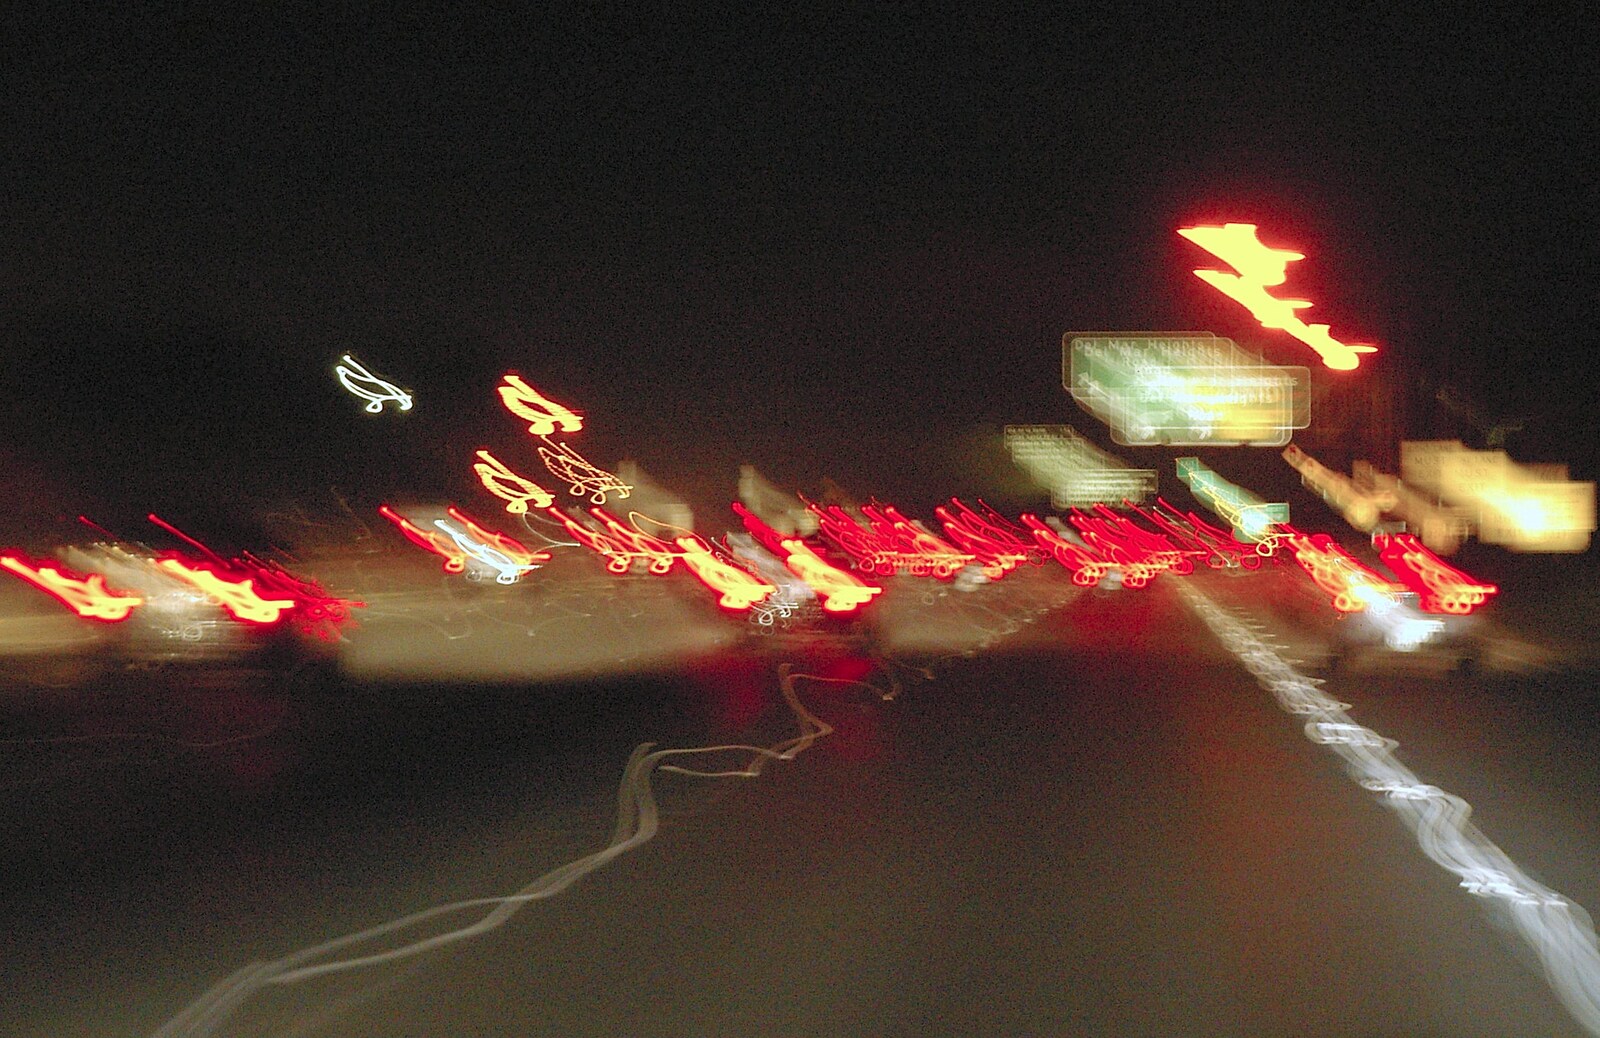 Tail lights in the dark from San Diego Misc: Beaches, Car Parks and Airports, San Diego, California, US - 4th March 2006